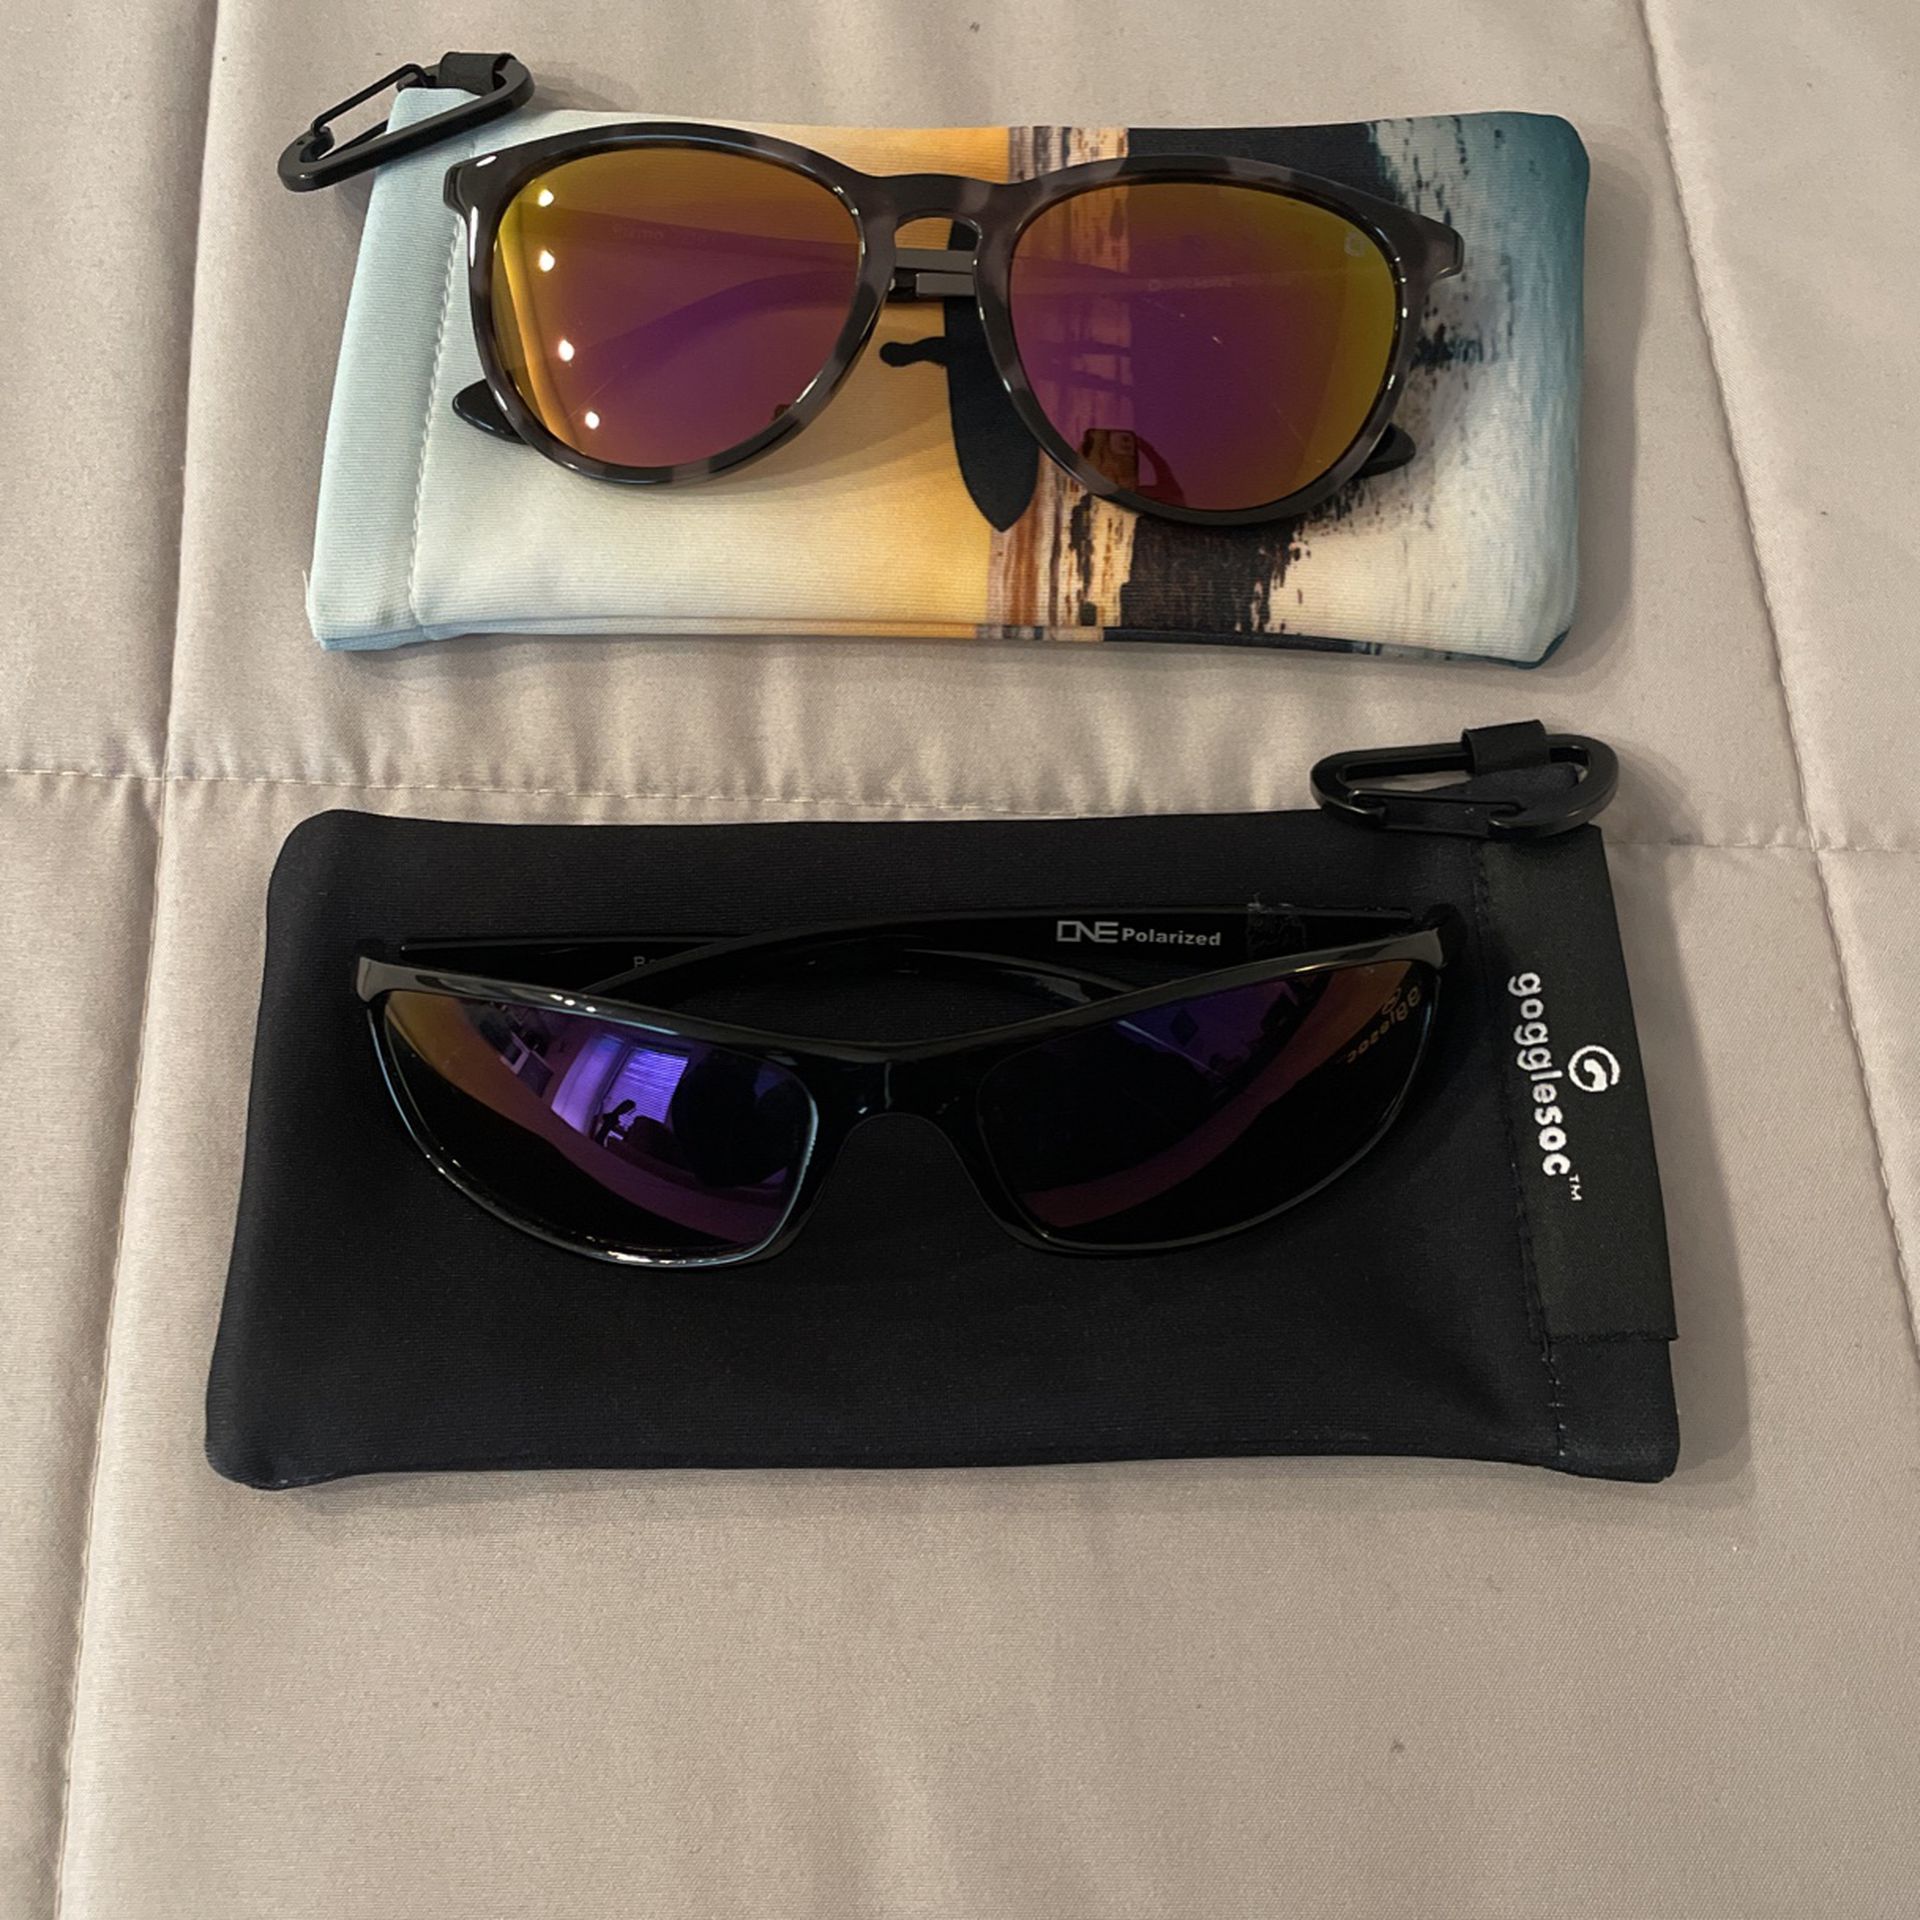 (2)Polarized Sunglasses with (2)Gogglesoc’s